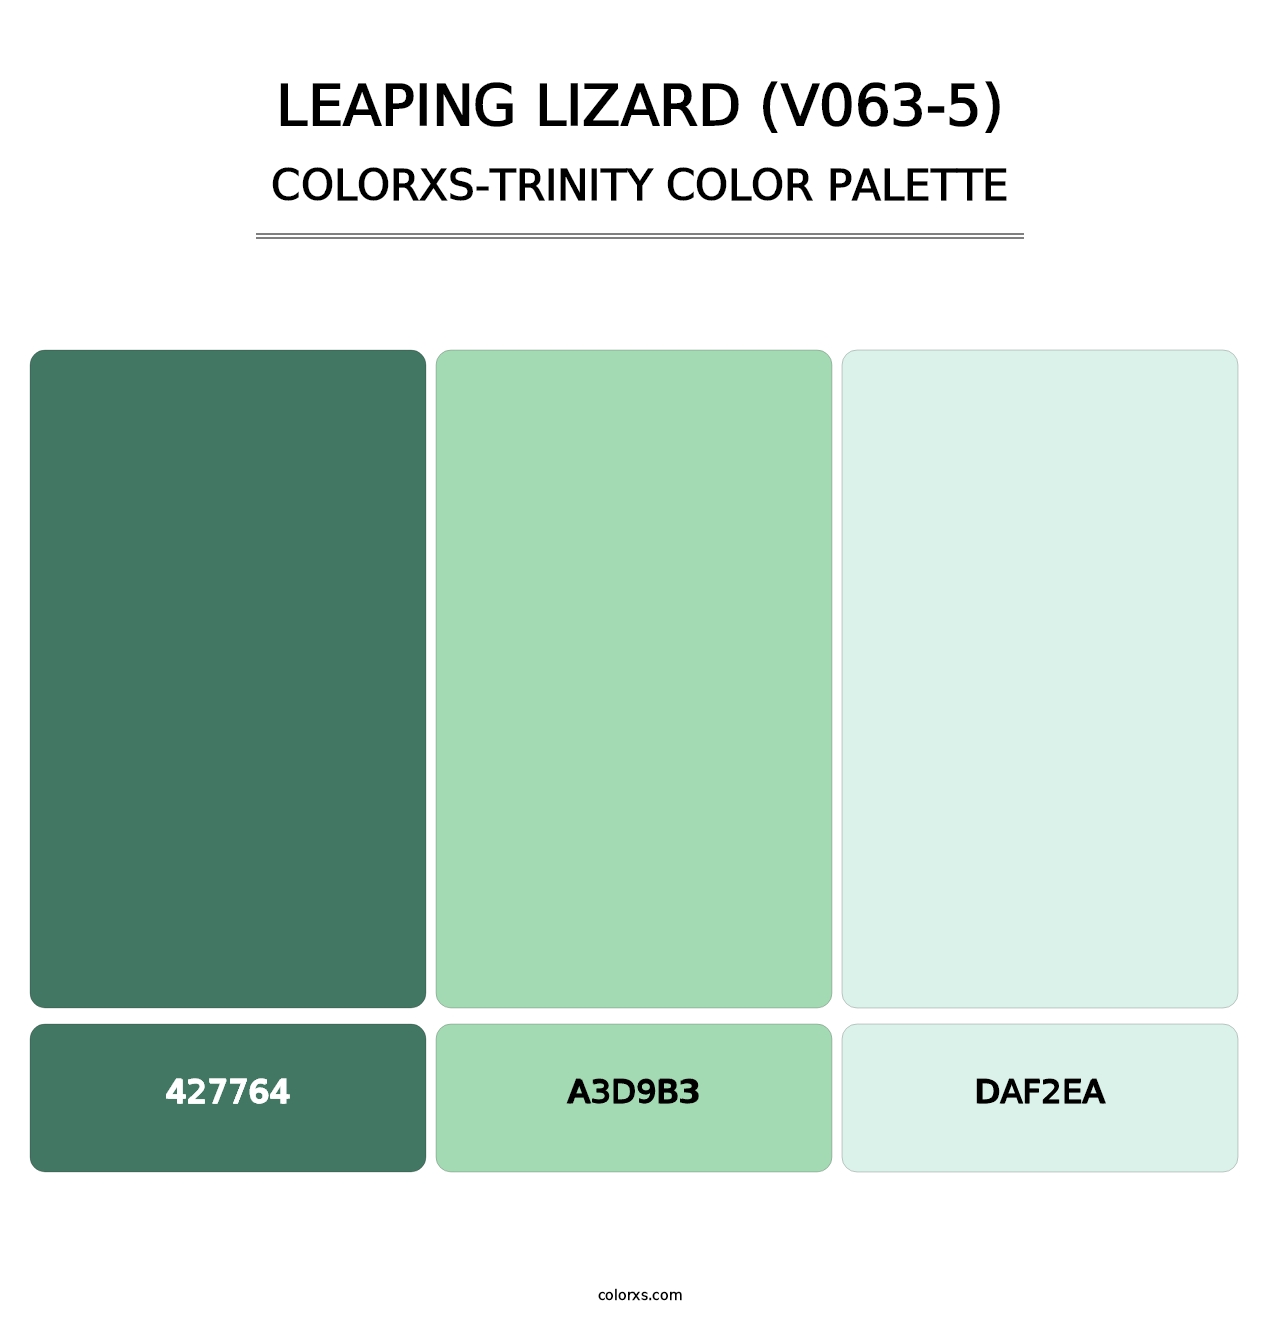 Leaping Lizard (V063-5) - Colorxs Trinity Palette